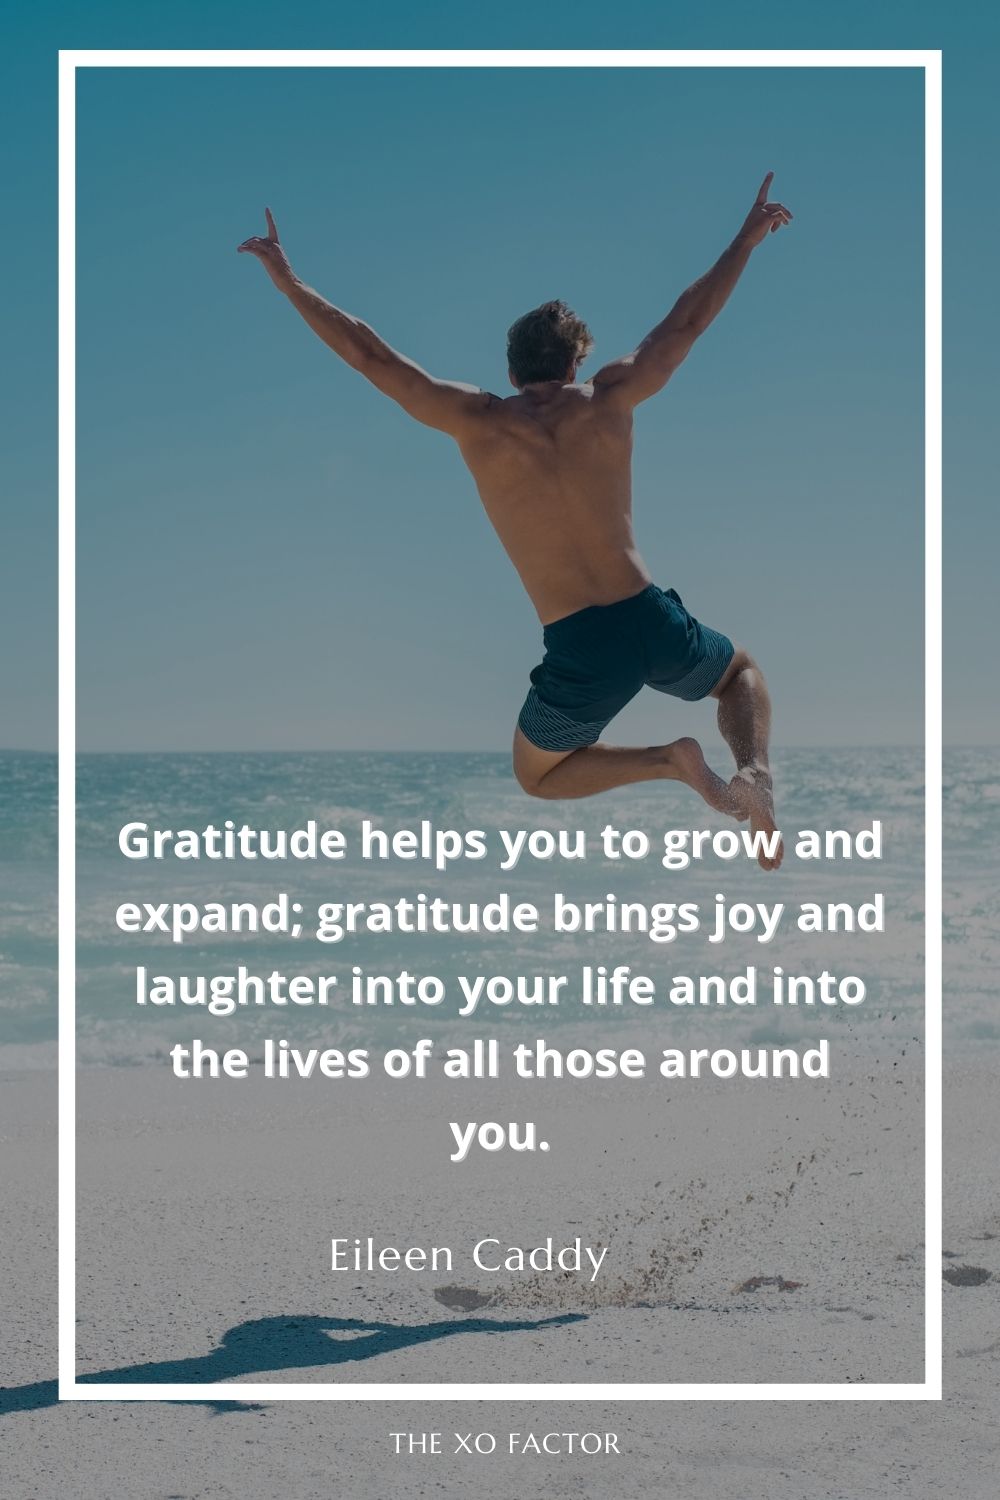 Gratitude helps you to grow and expand; gratitude brings joy and laughter into your life and into the lives of all those around you.